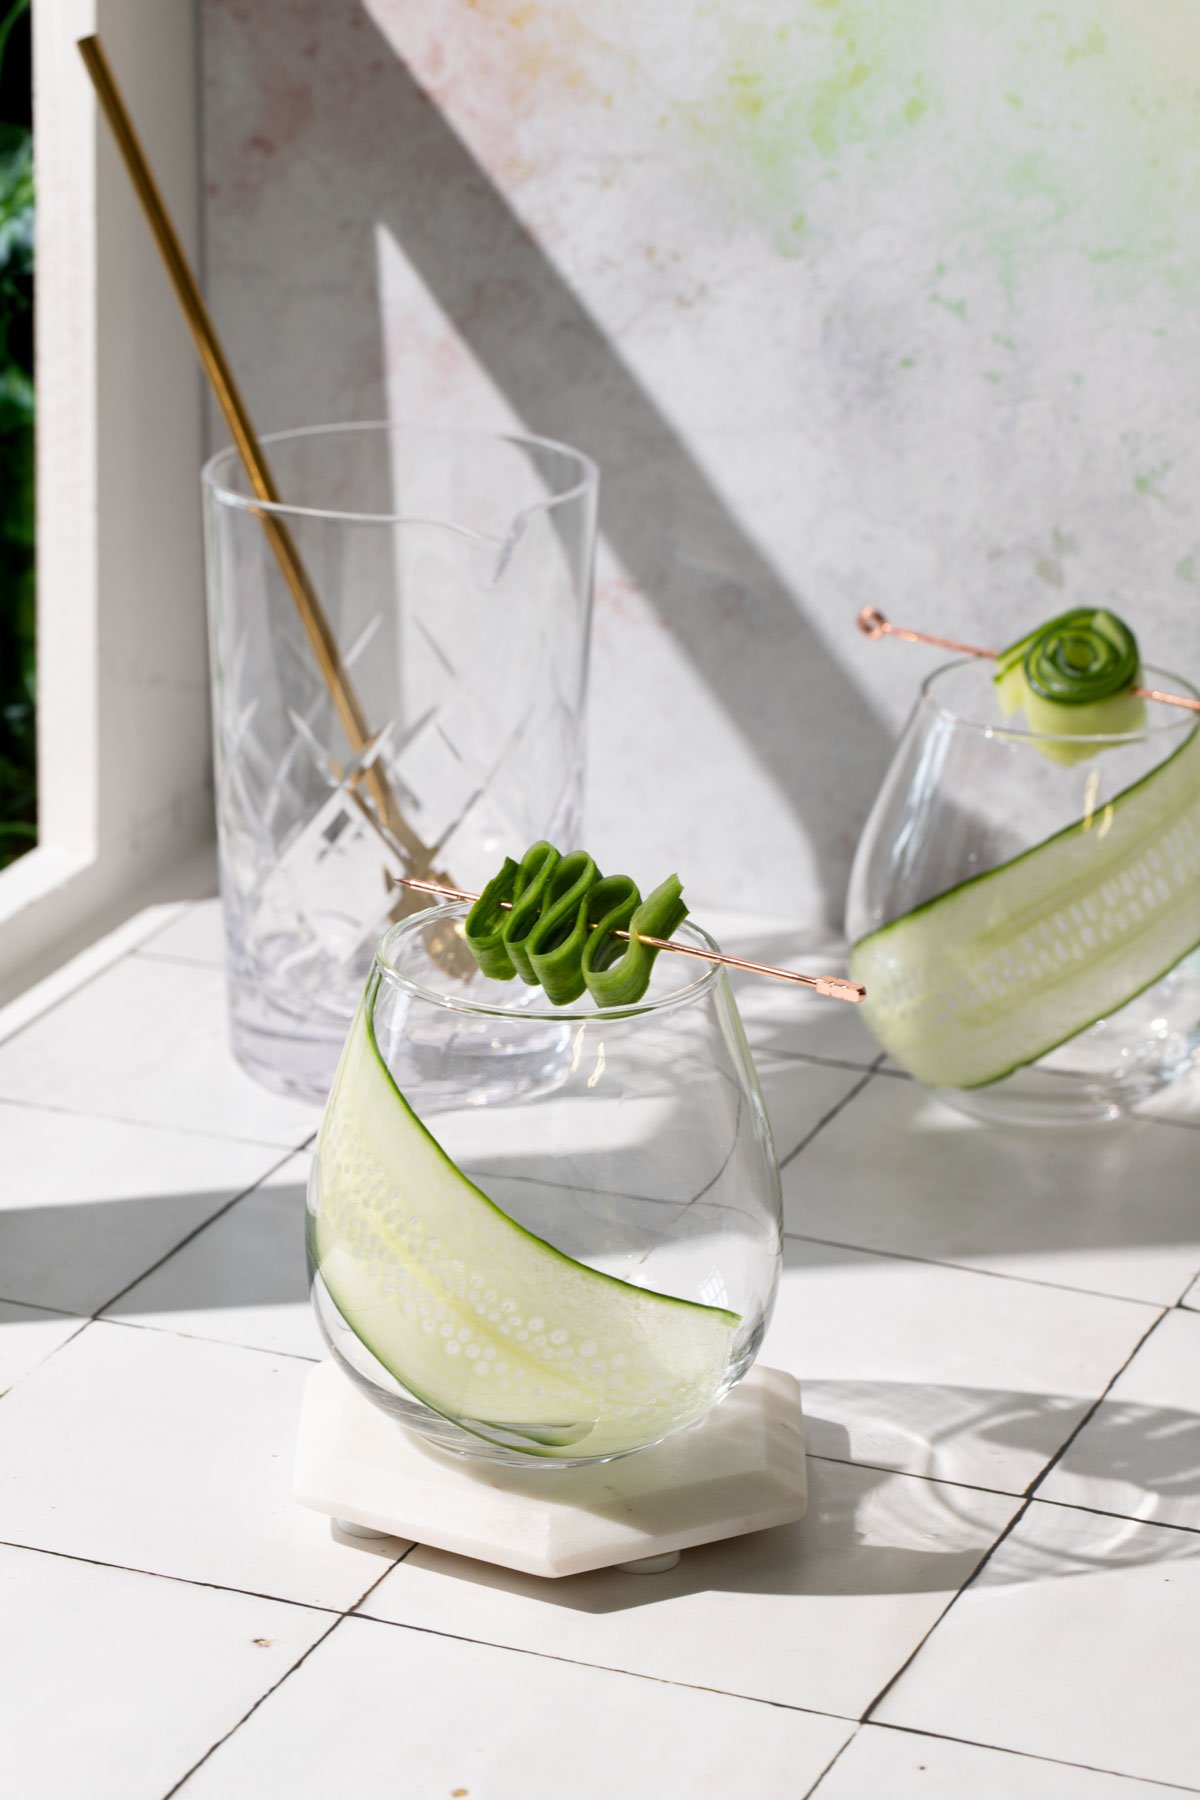 Cucumber slices and cocktail pick in glasses